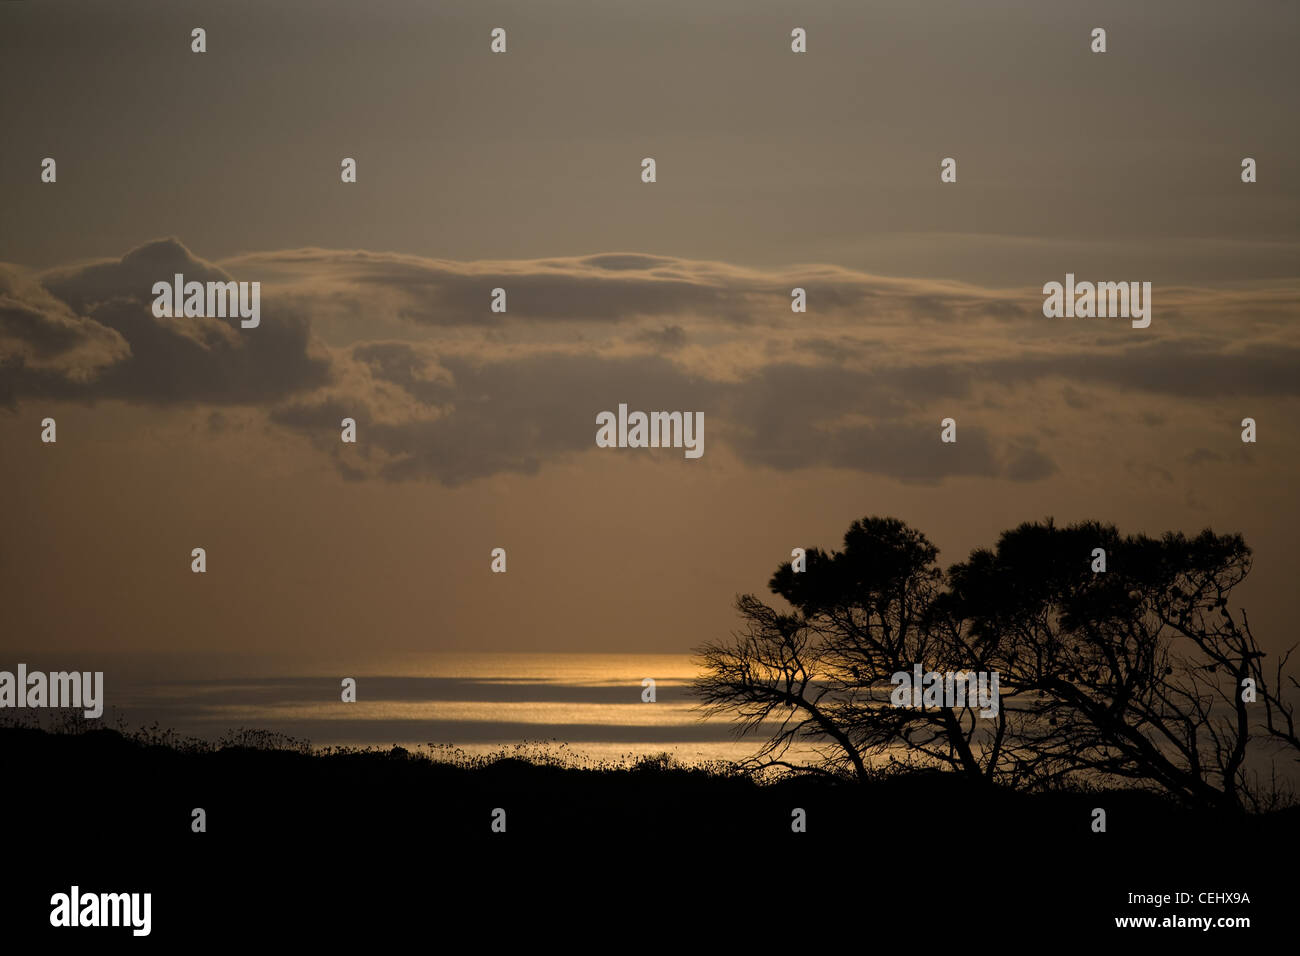 Leafless pines silhouettes with Ionic Sea in the background Stock Photo